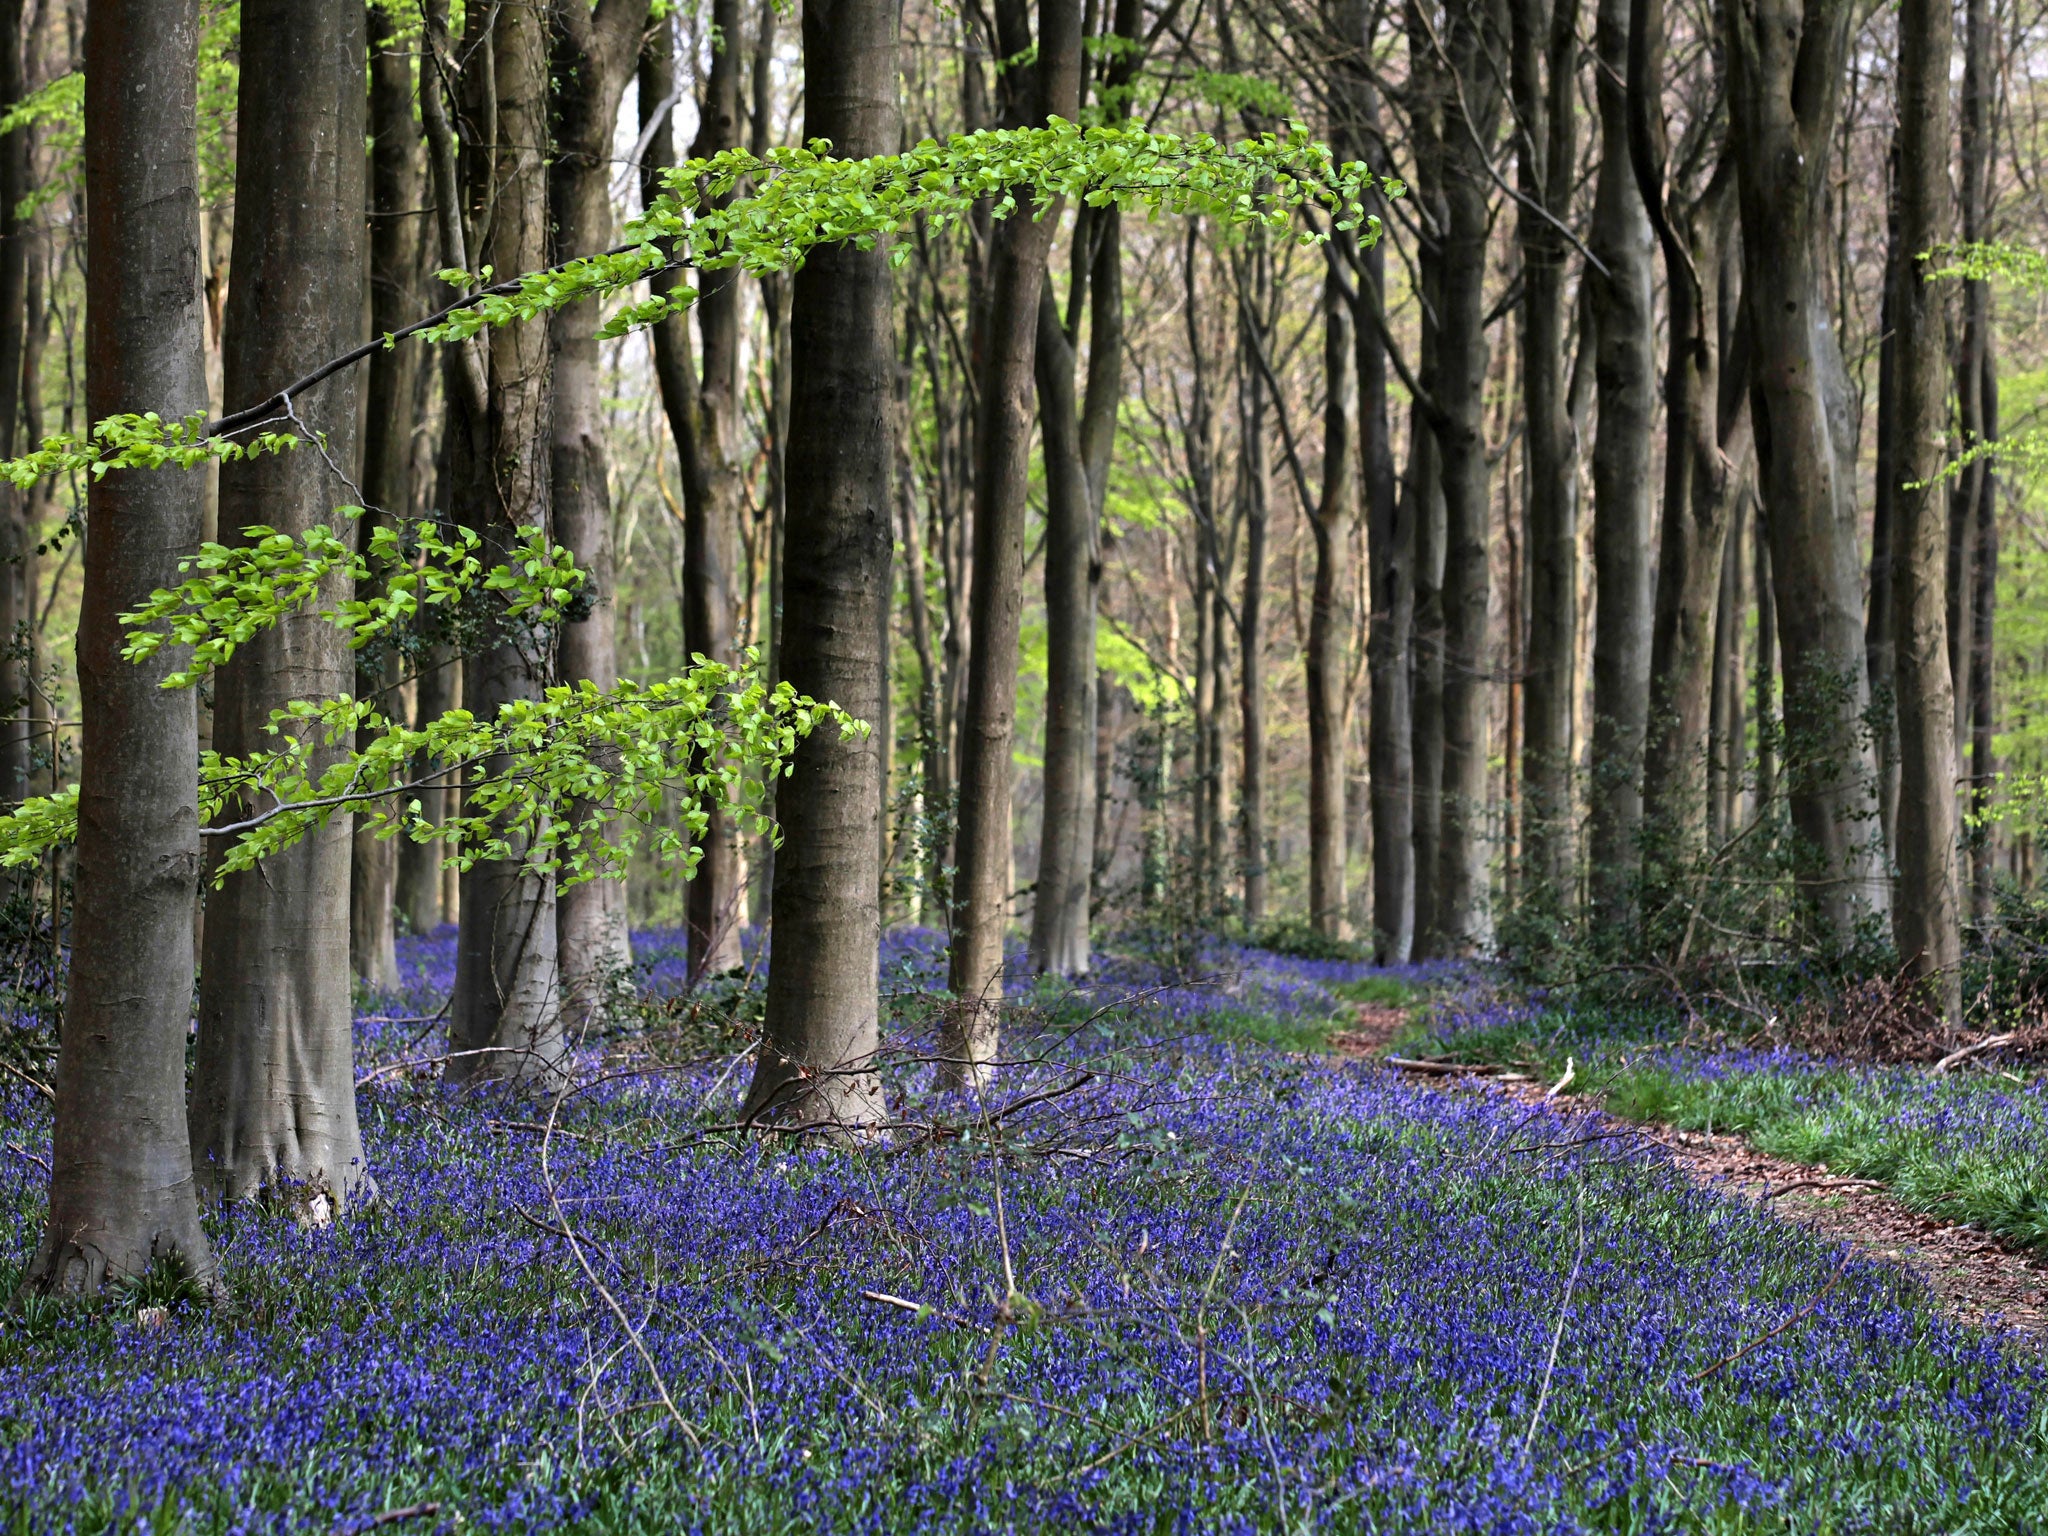 The native bluebell is being threatened by a close relative, the Spanish bluebell